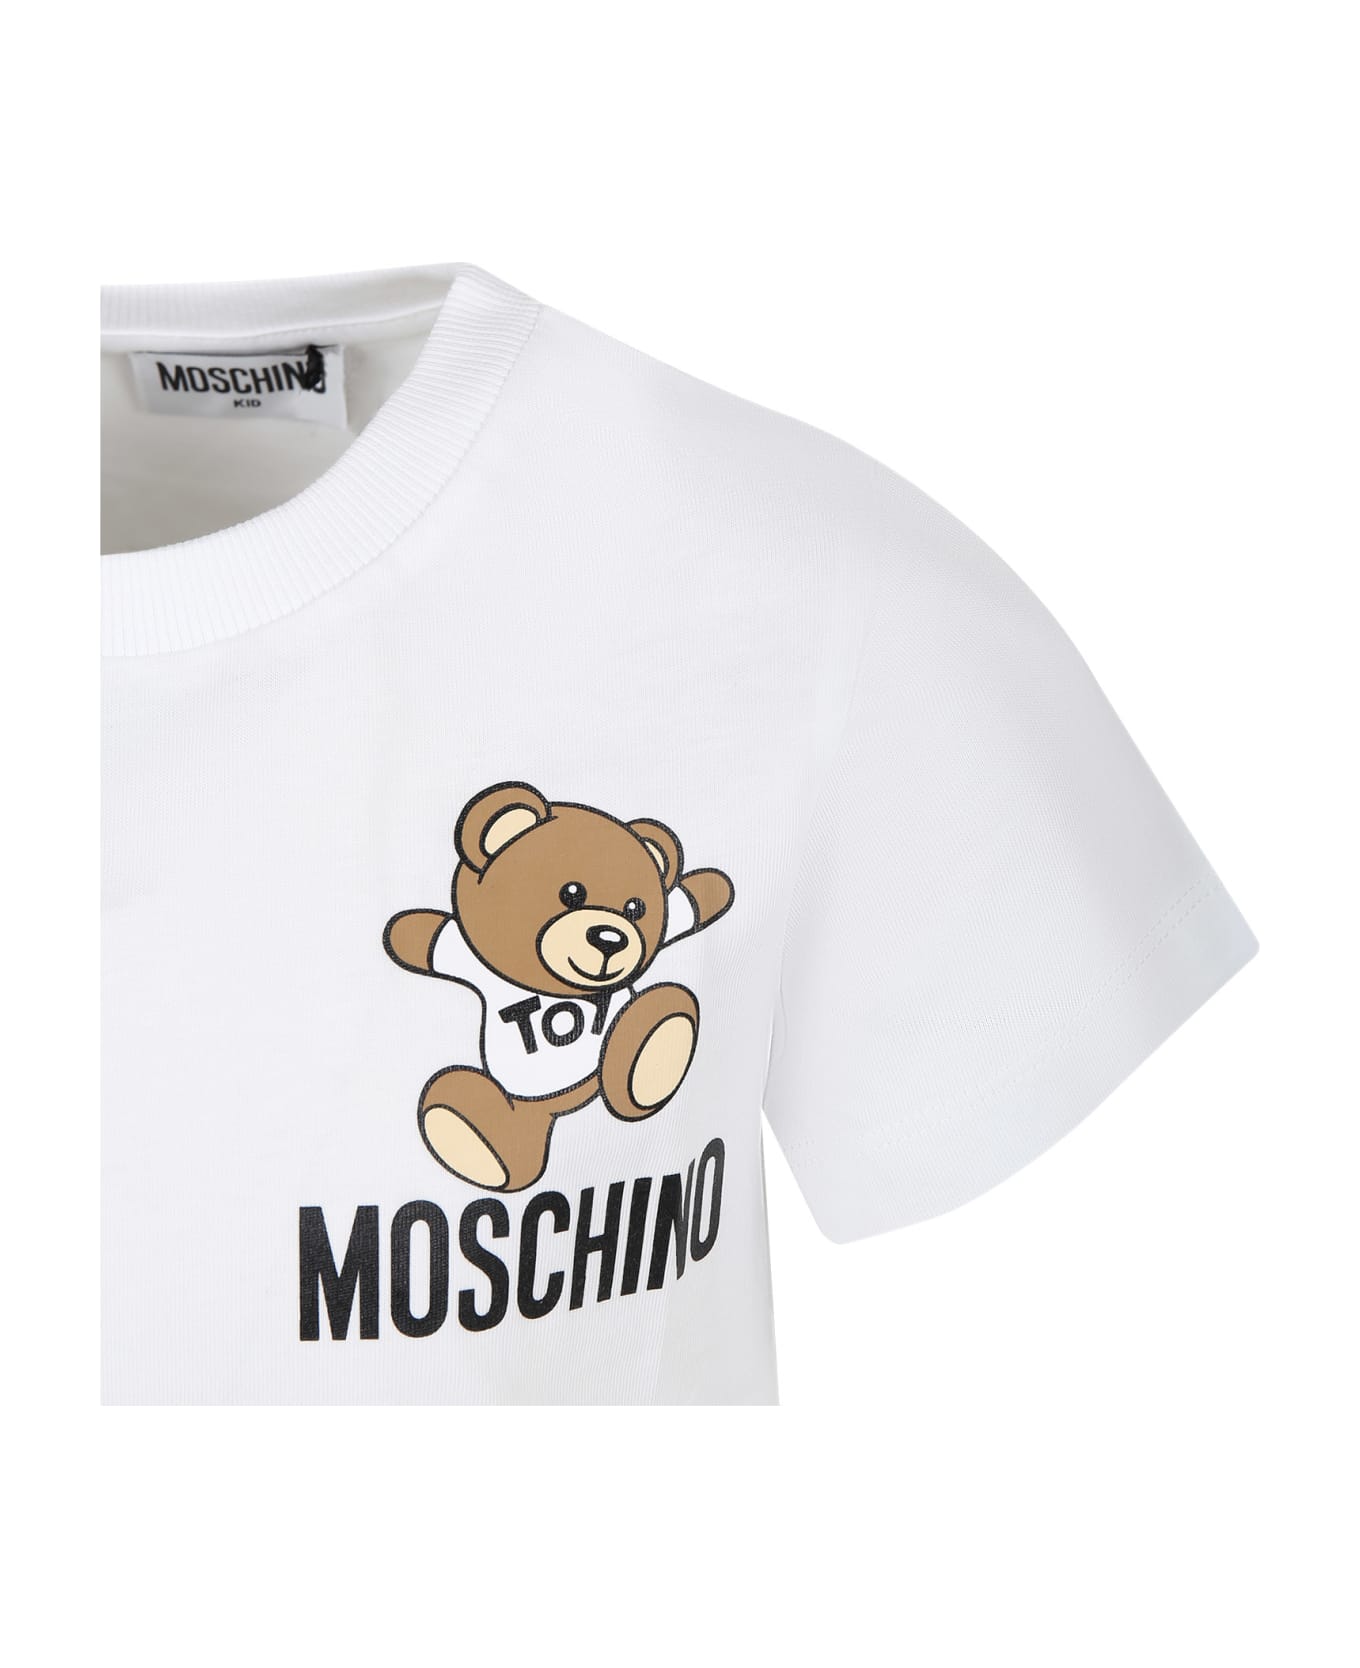 Moschino White T-shirt For Kids With Teddy Bear And Logo - Bianco Ottico